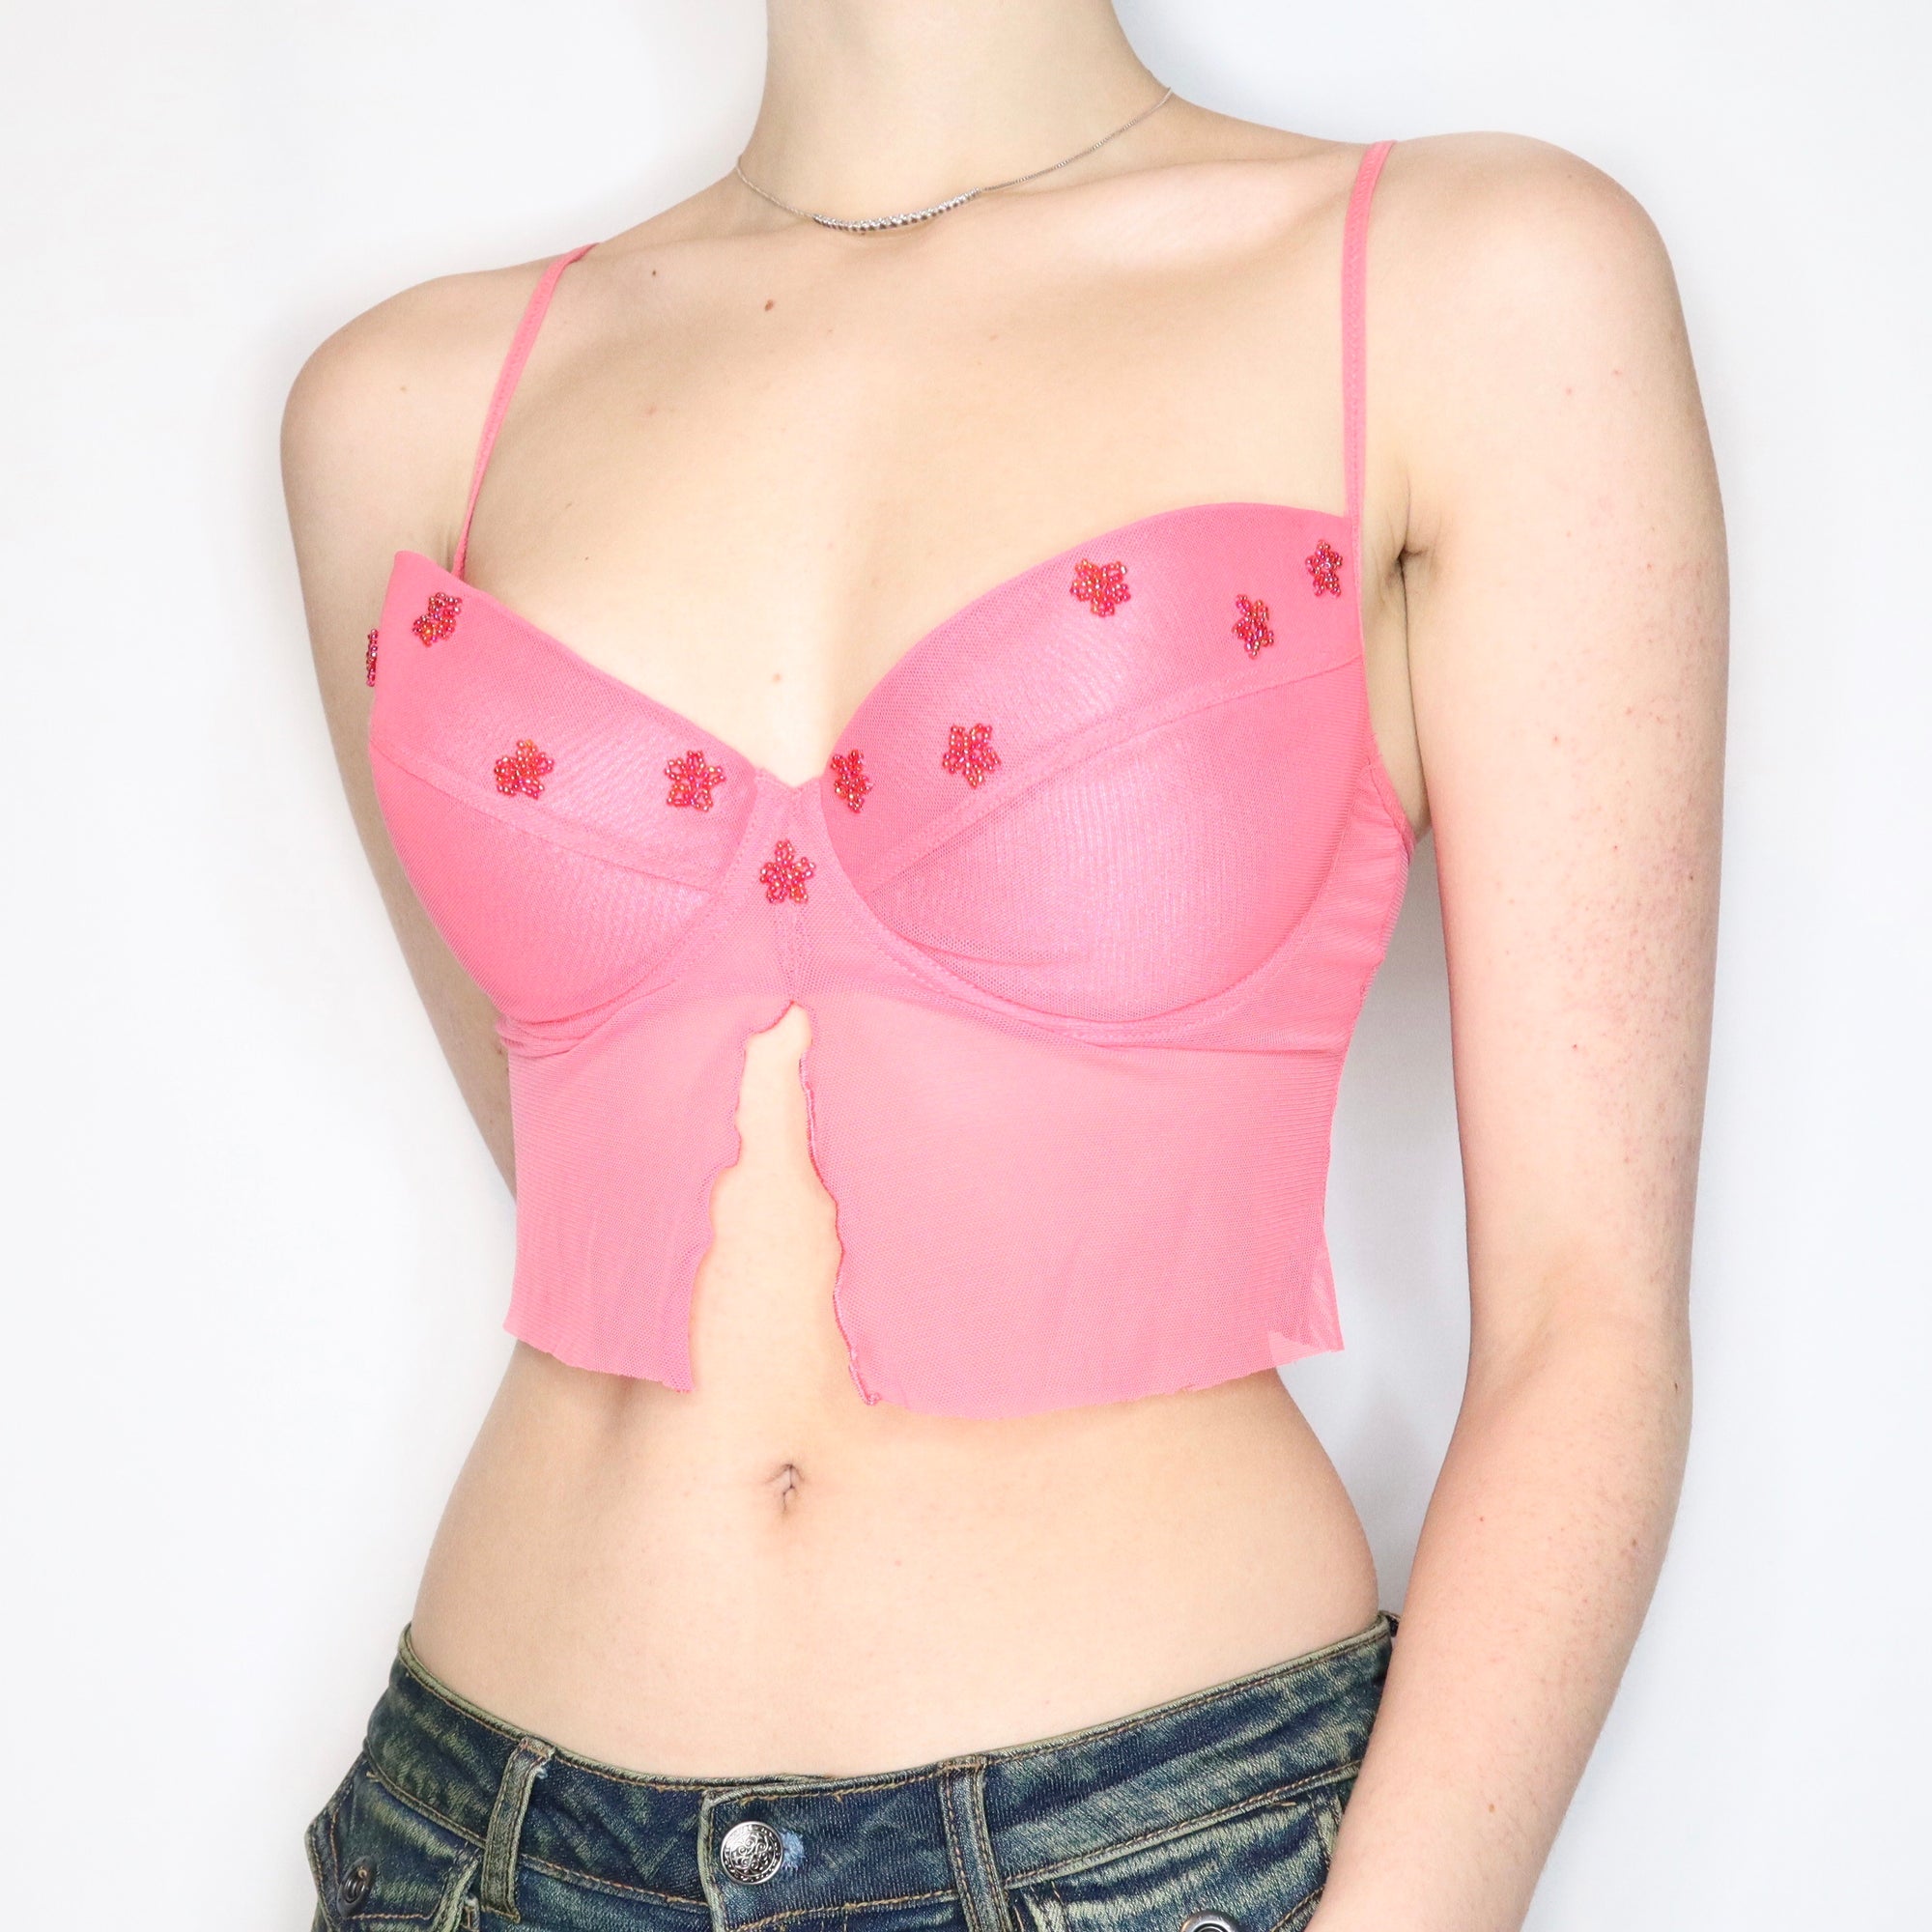 Vintage Early 2000s Cropped Pink Mesh Bustier Top